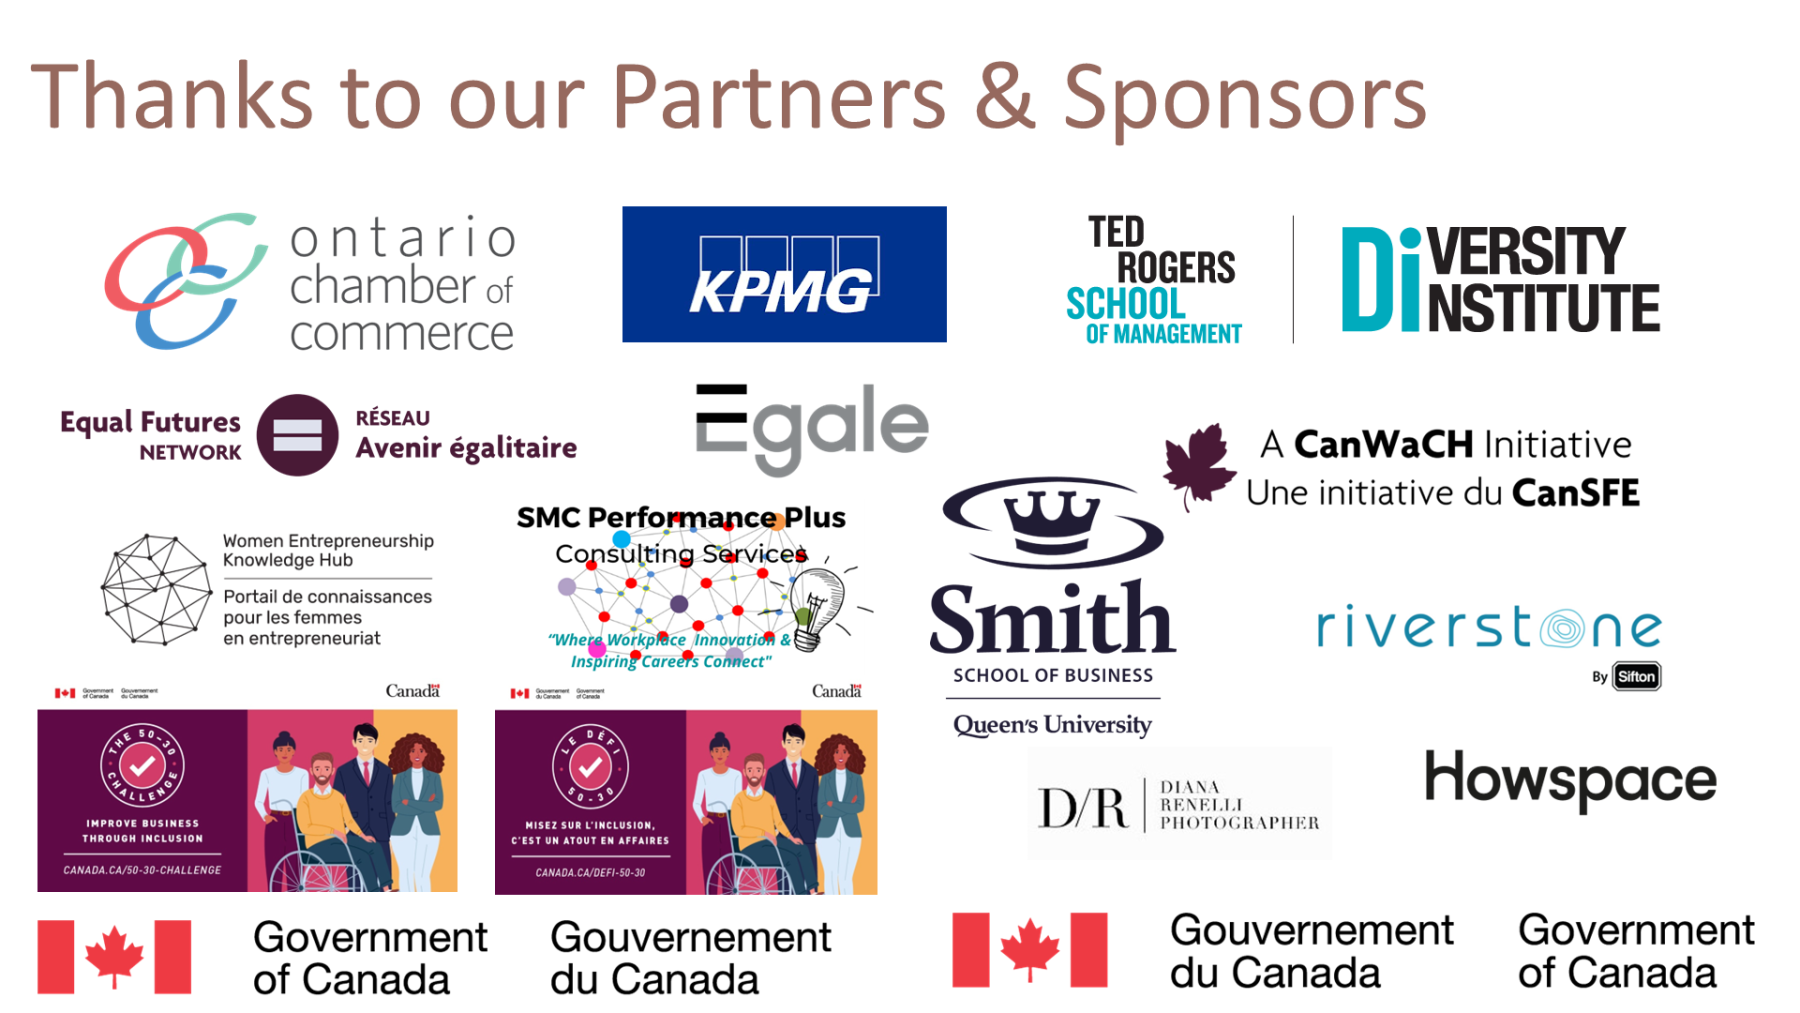 Thanks to our Partners & Sponsors